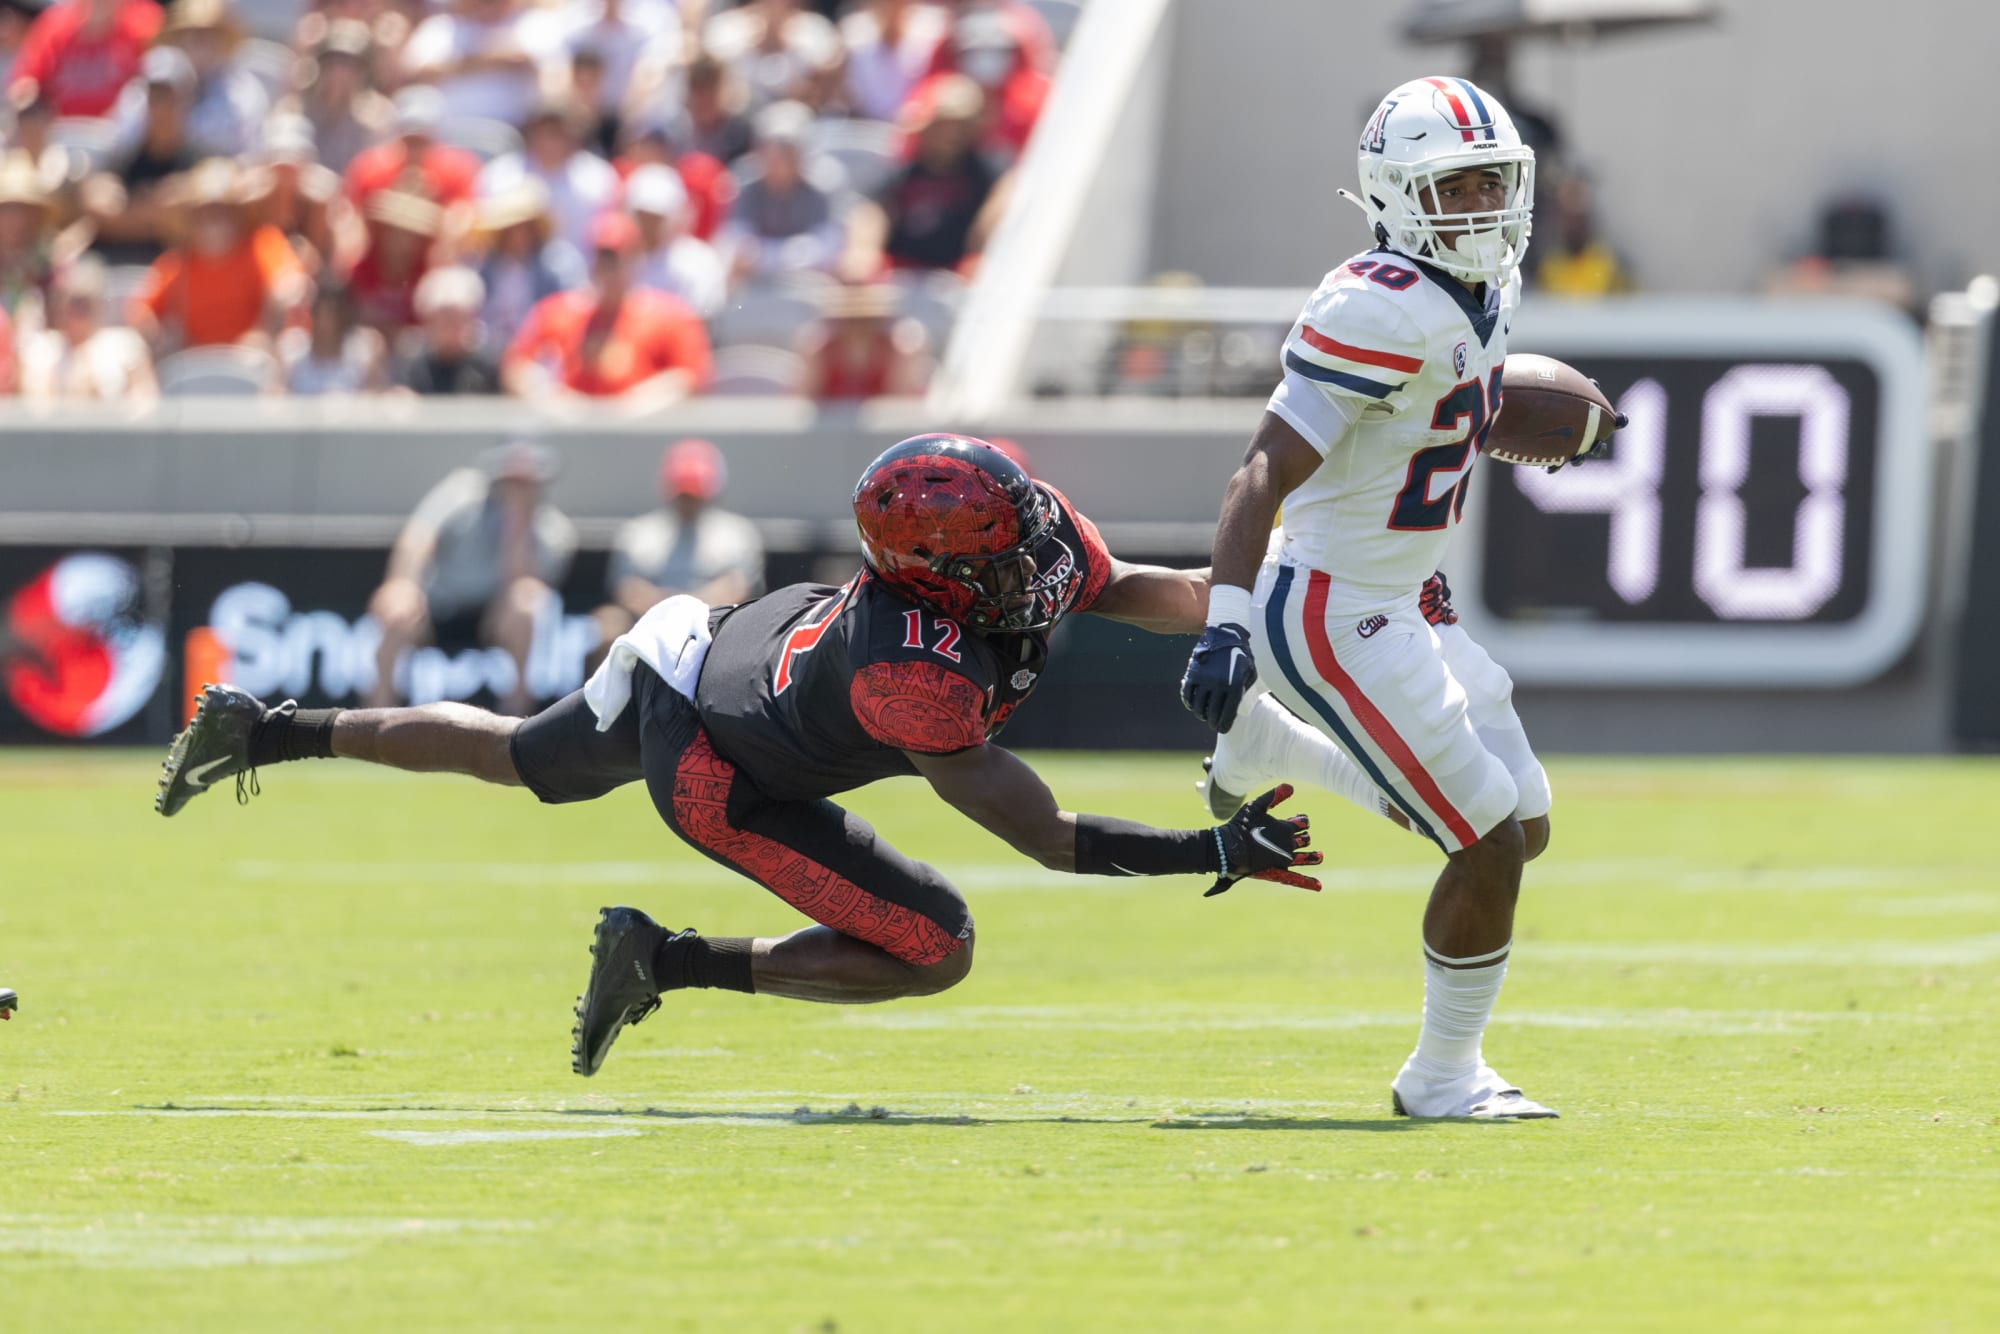 Arizona’s running back Rayshon Luke could be out for a while